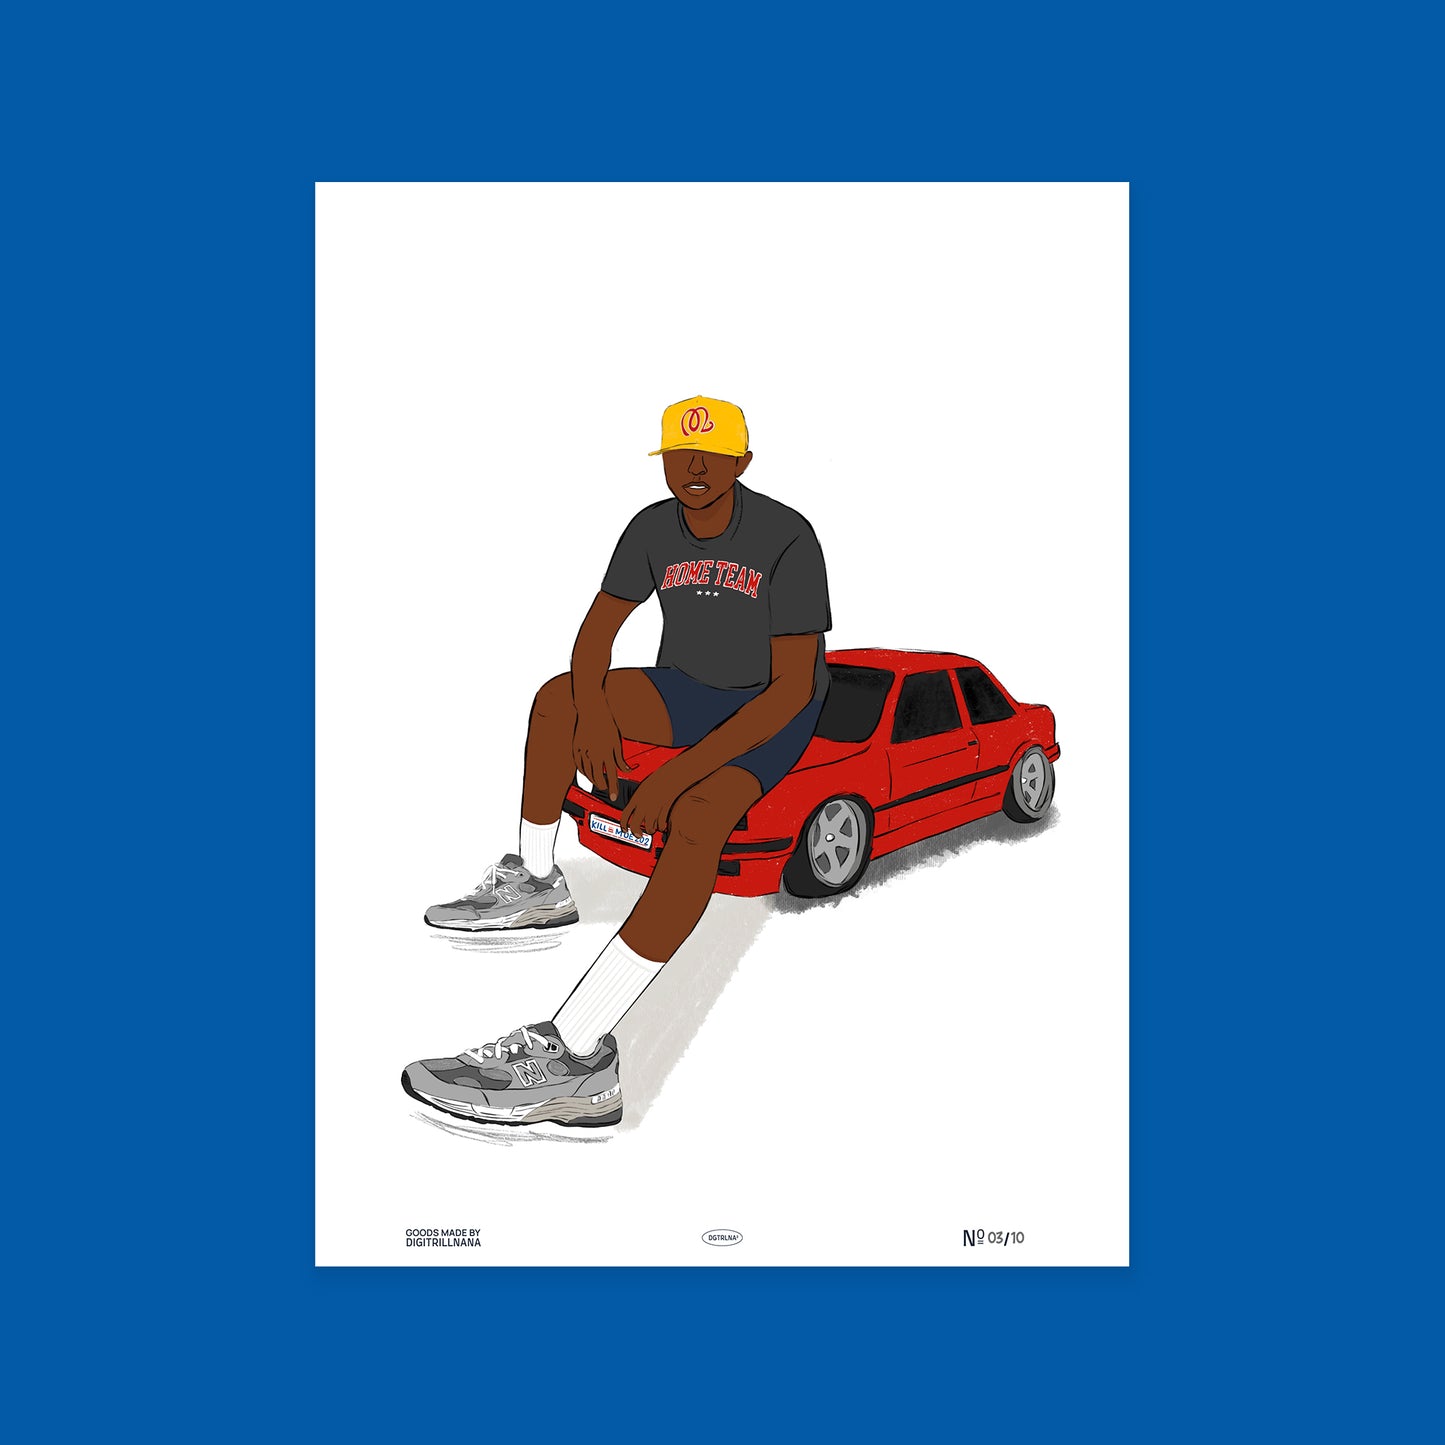 OG Glizzy 9x12” 18x24" art print from Goods Made By Digitrillnana, Ashley Fletcher. Modern, fashion car poster, art for Black Men. Perfect for home decor, wall art, art prints, and more! Black Woman Owned.